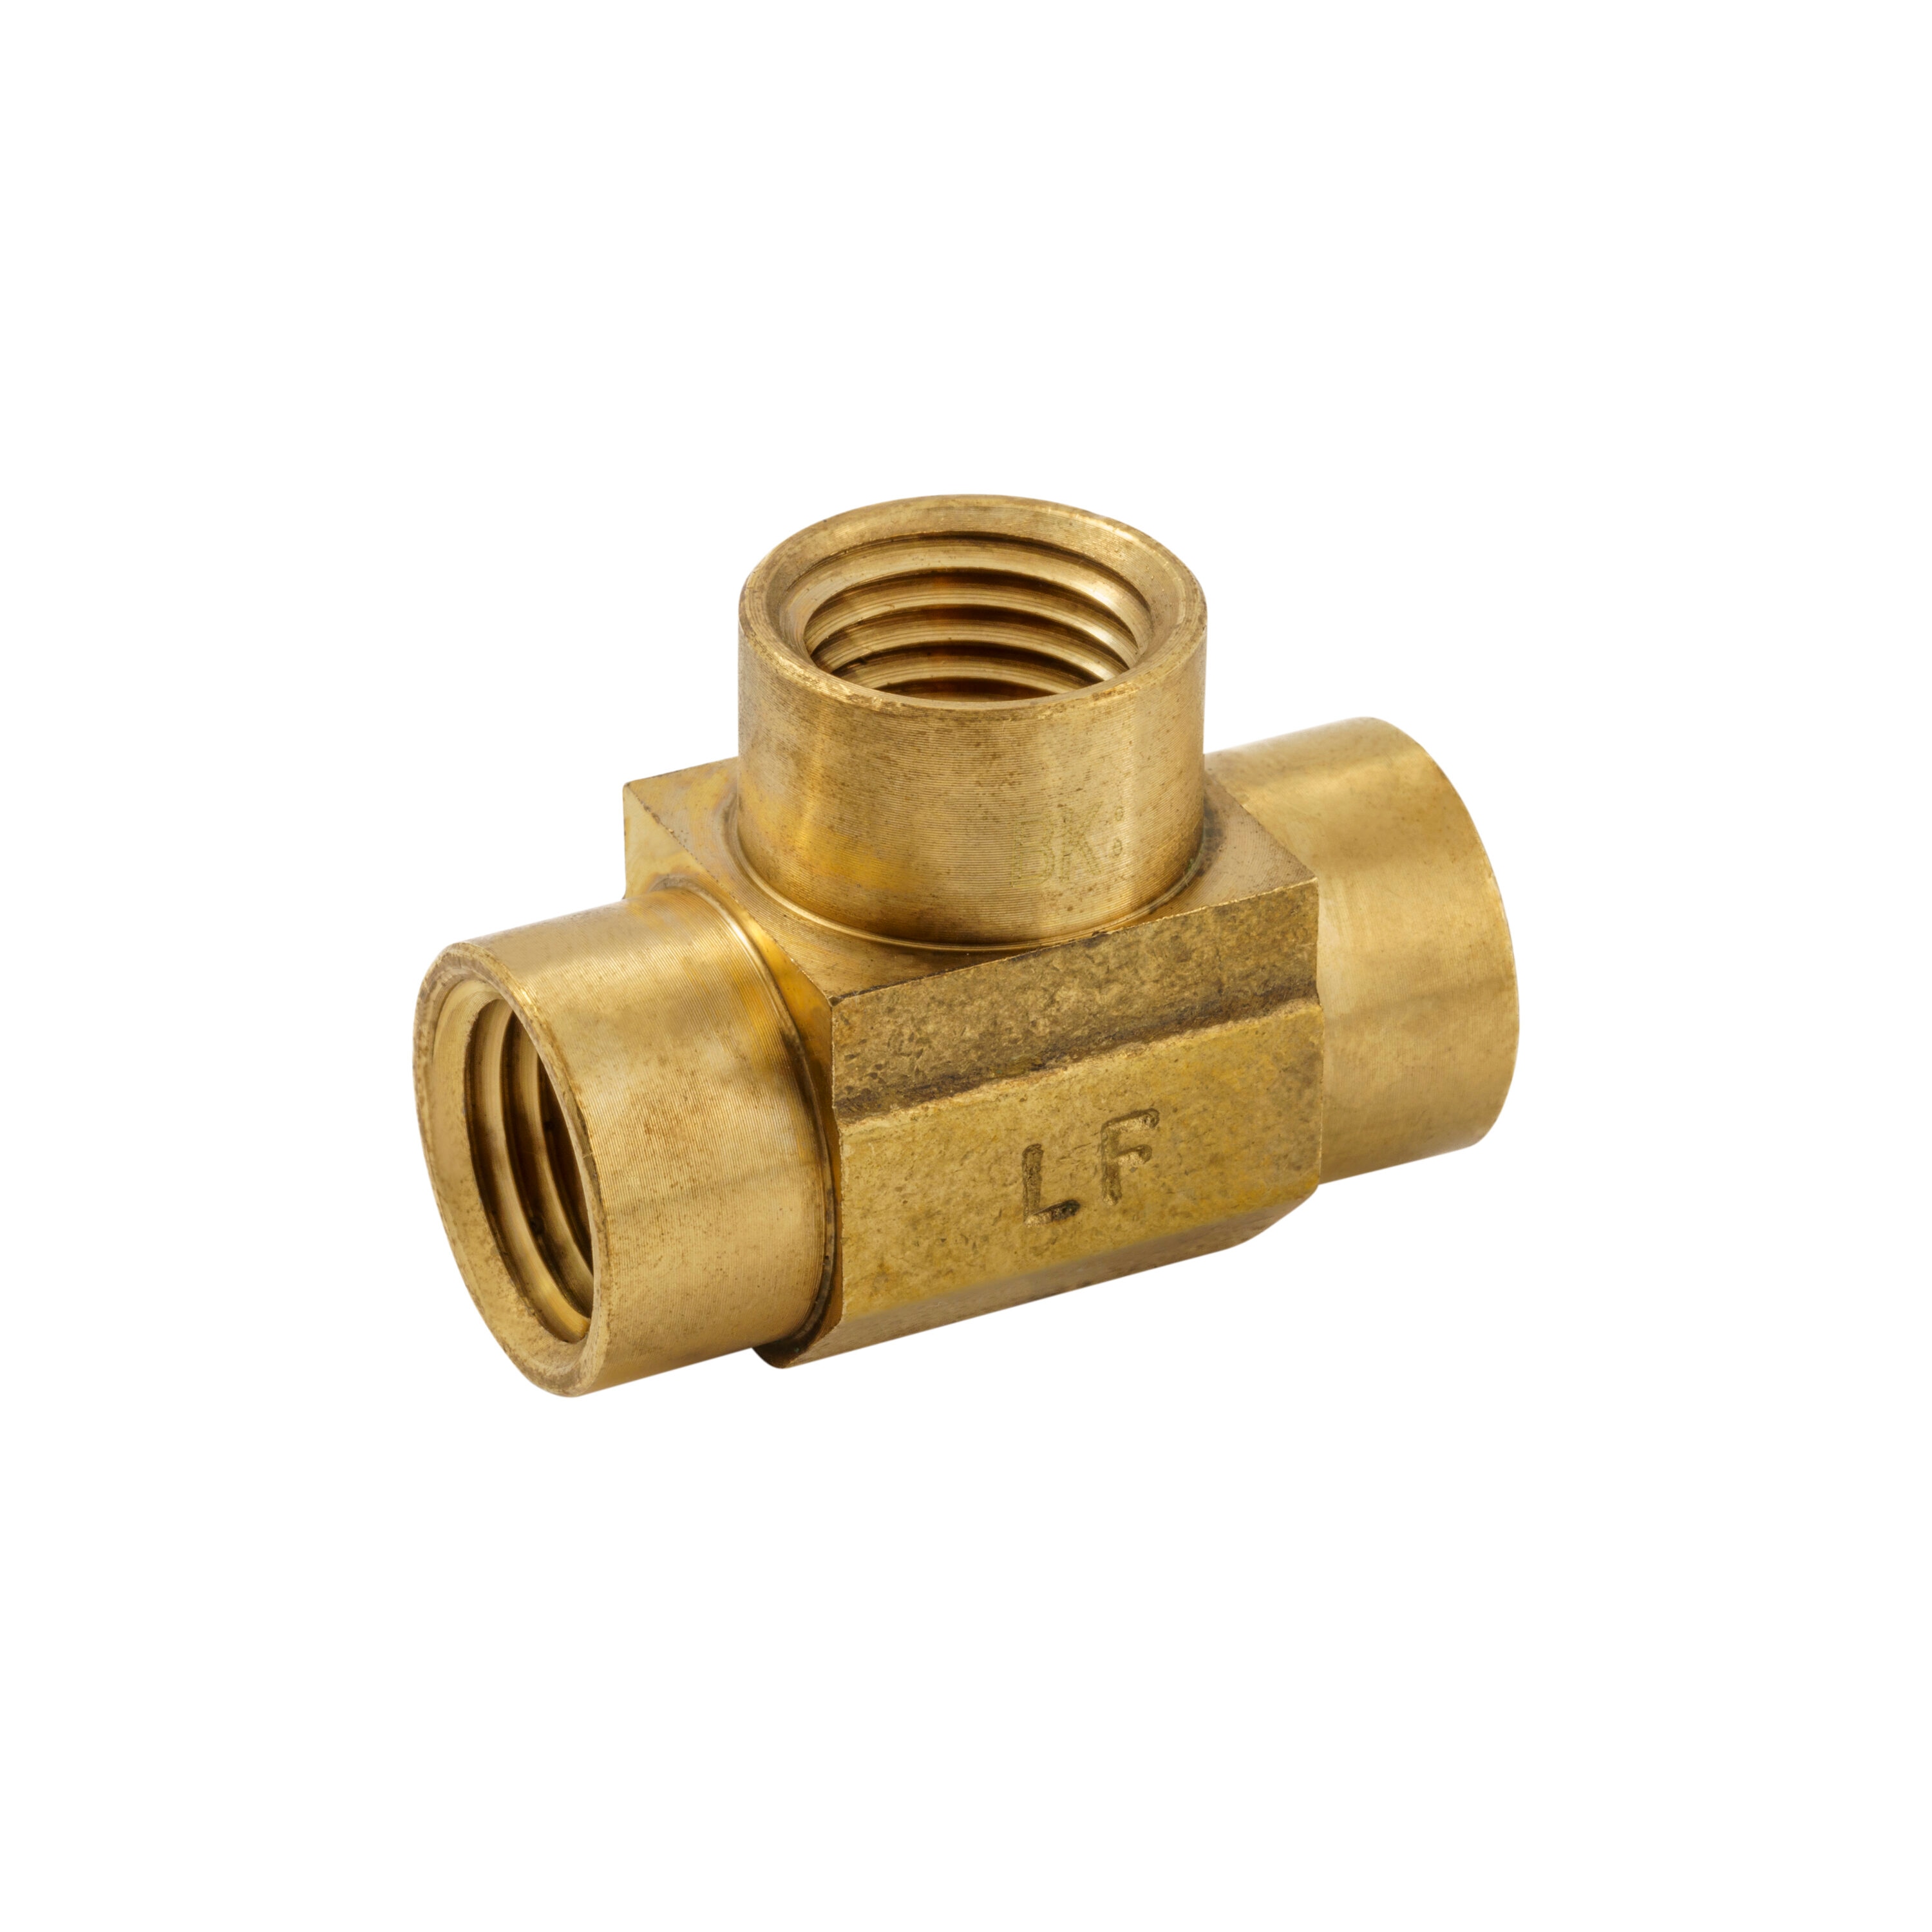 Proline Series 1/4-in x 1/4-in Threaded Tee Fitting in the Brass